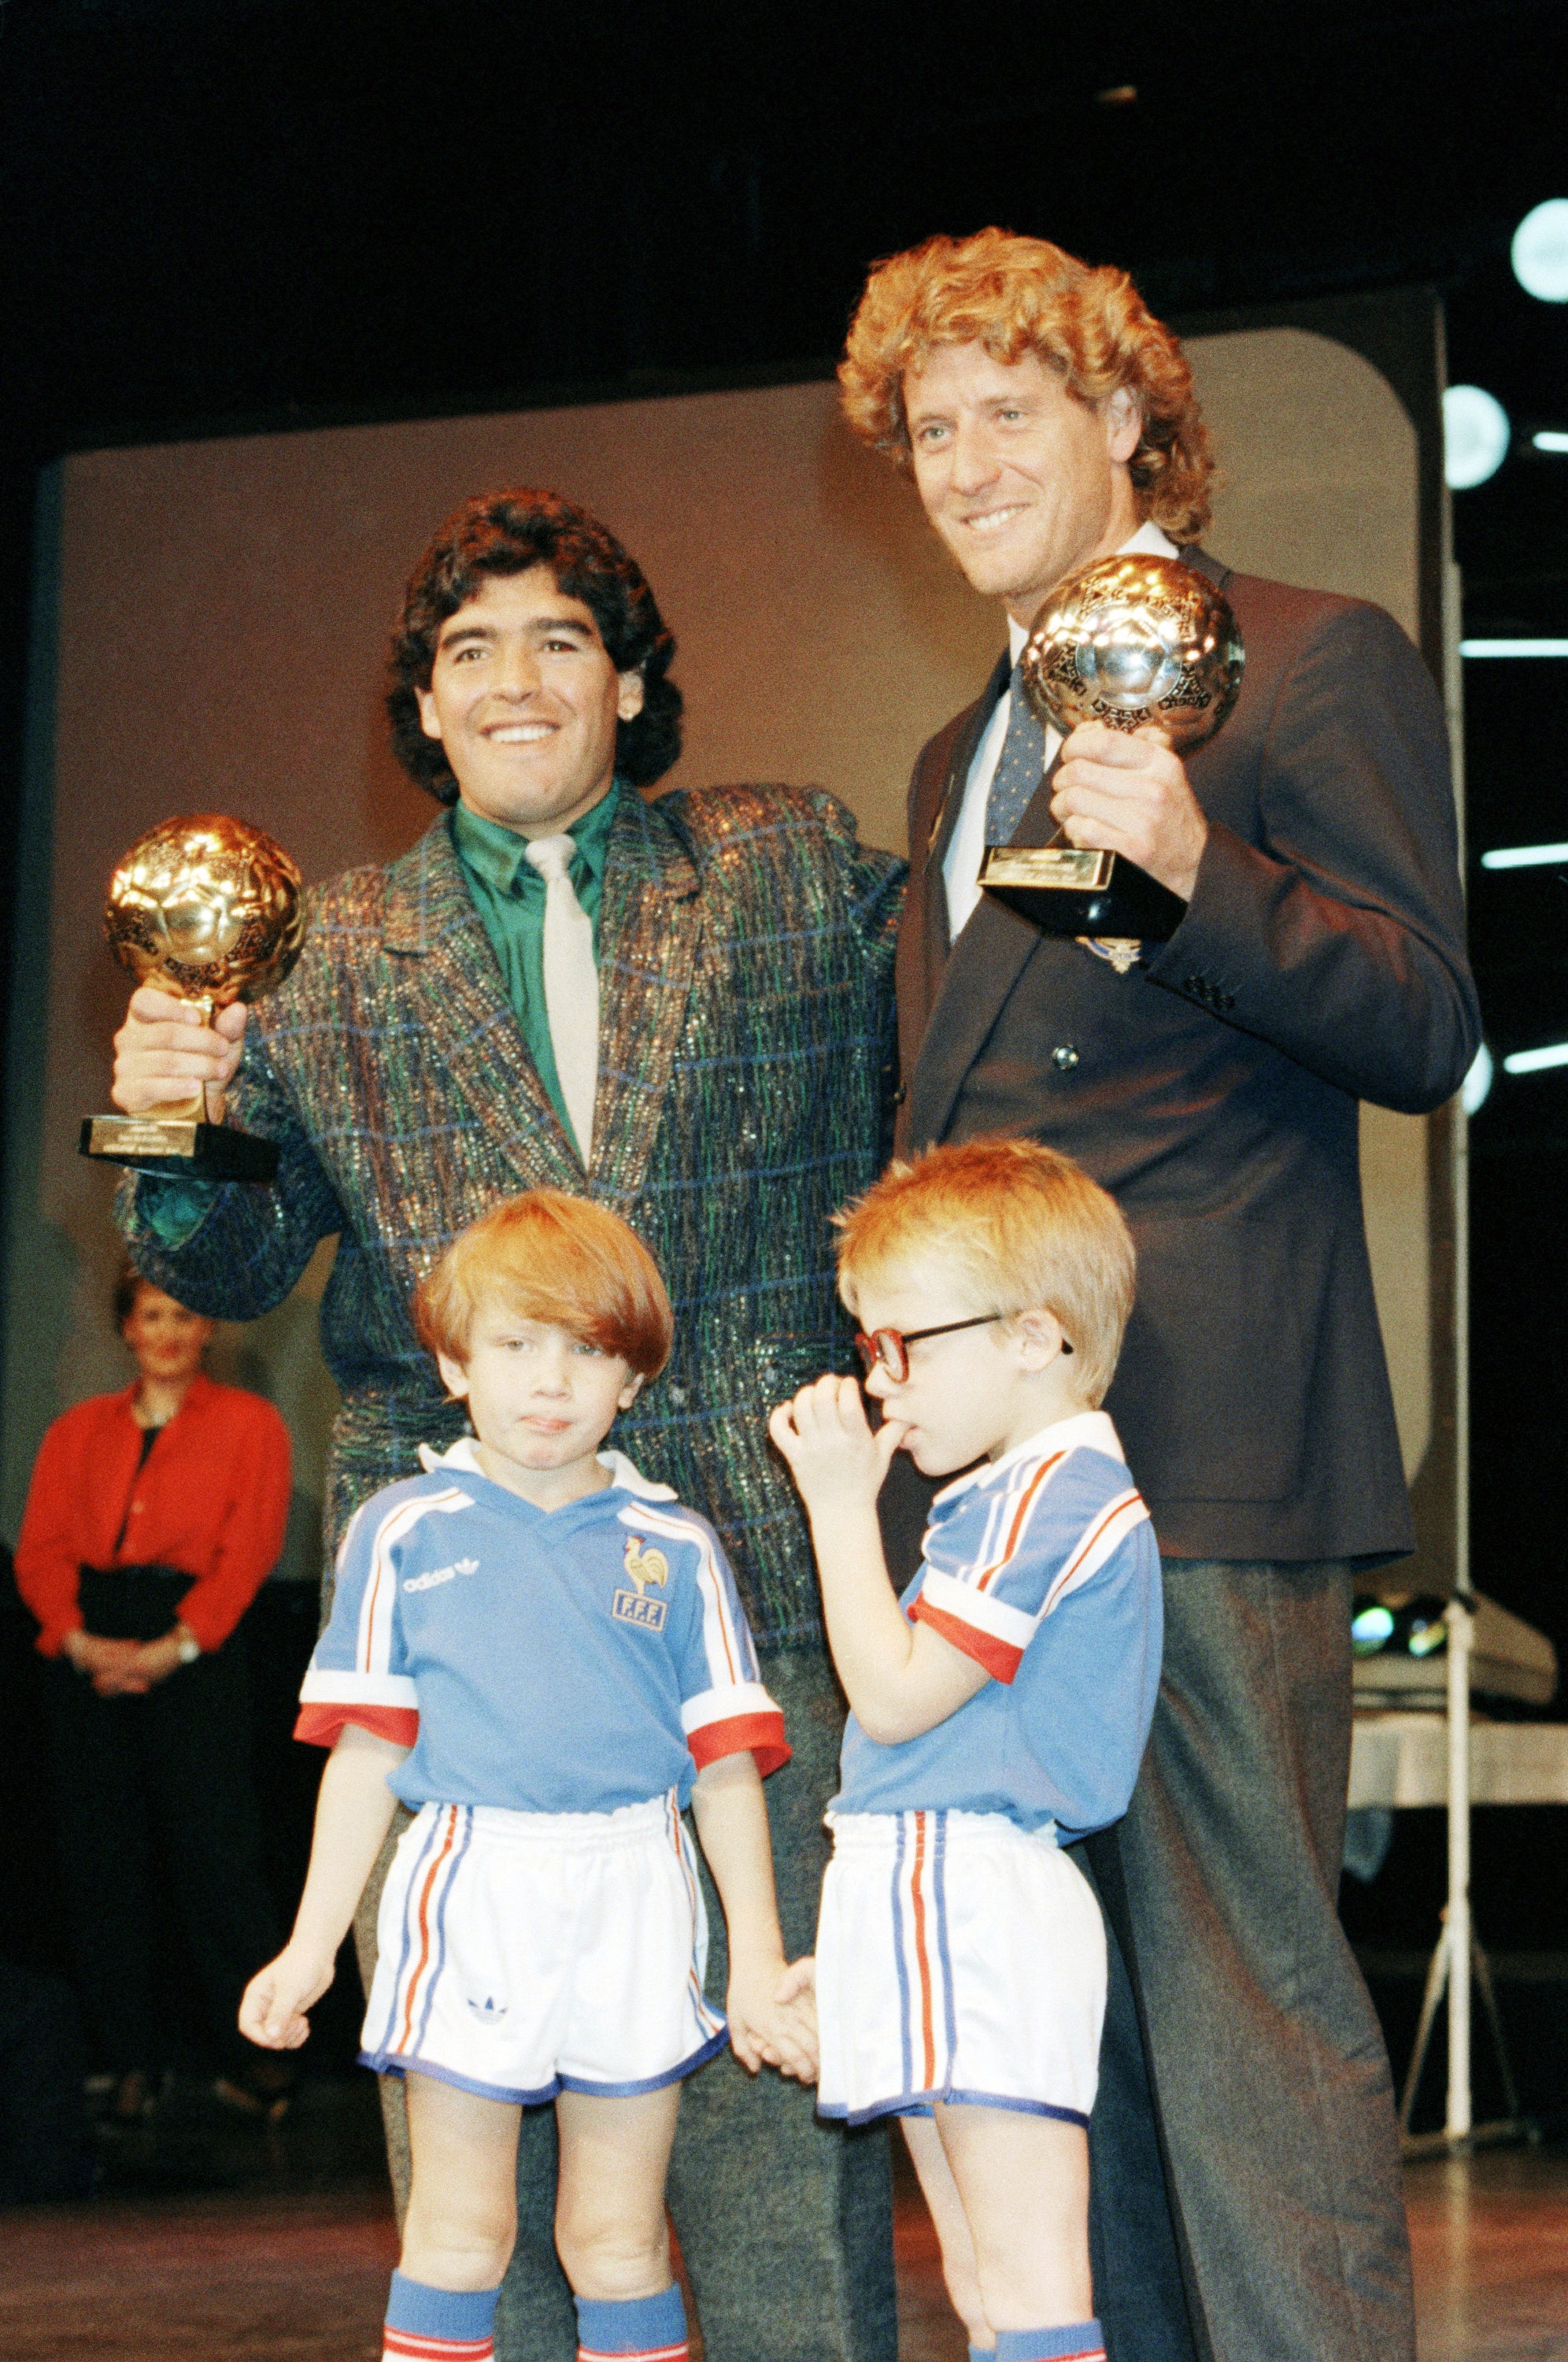 Diego Maradona, left, and West German goalkeeper Harald Schumacher are holding their World Cup awards